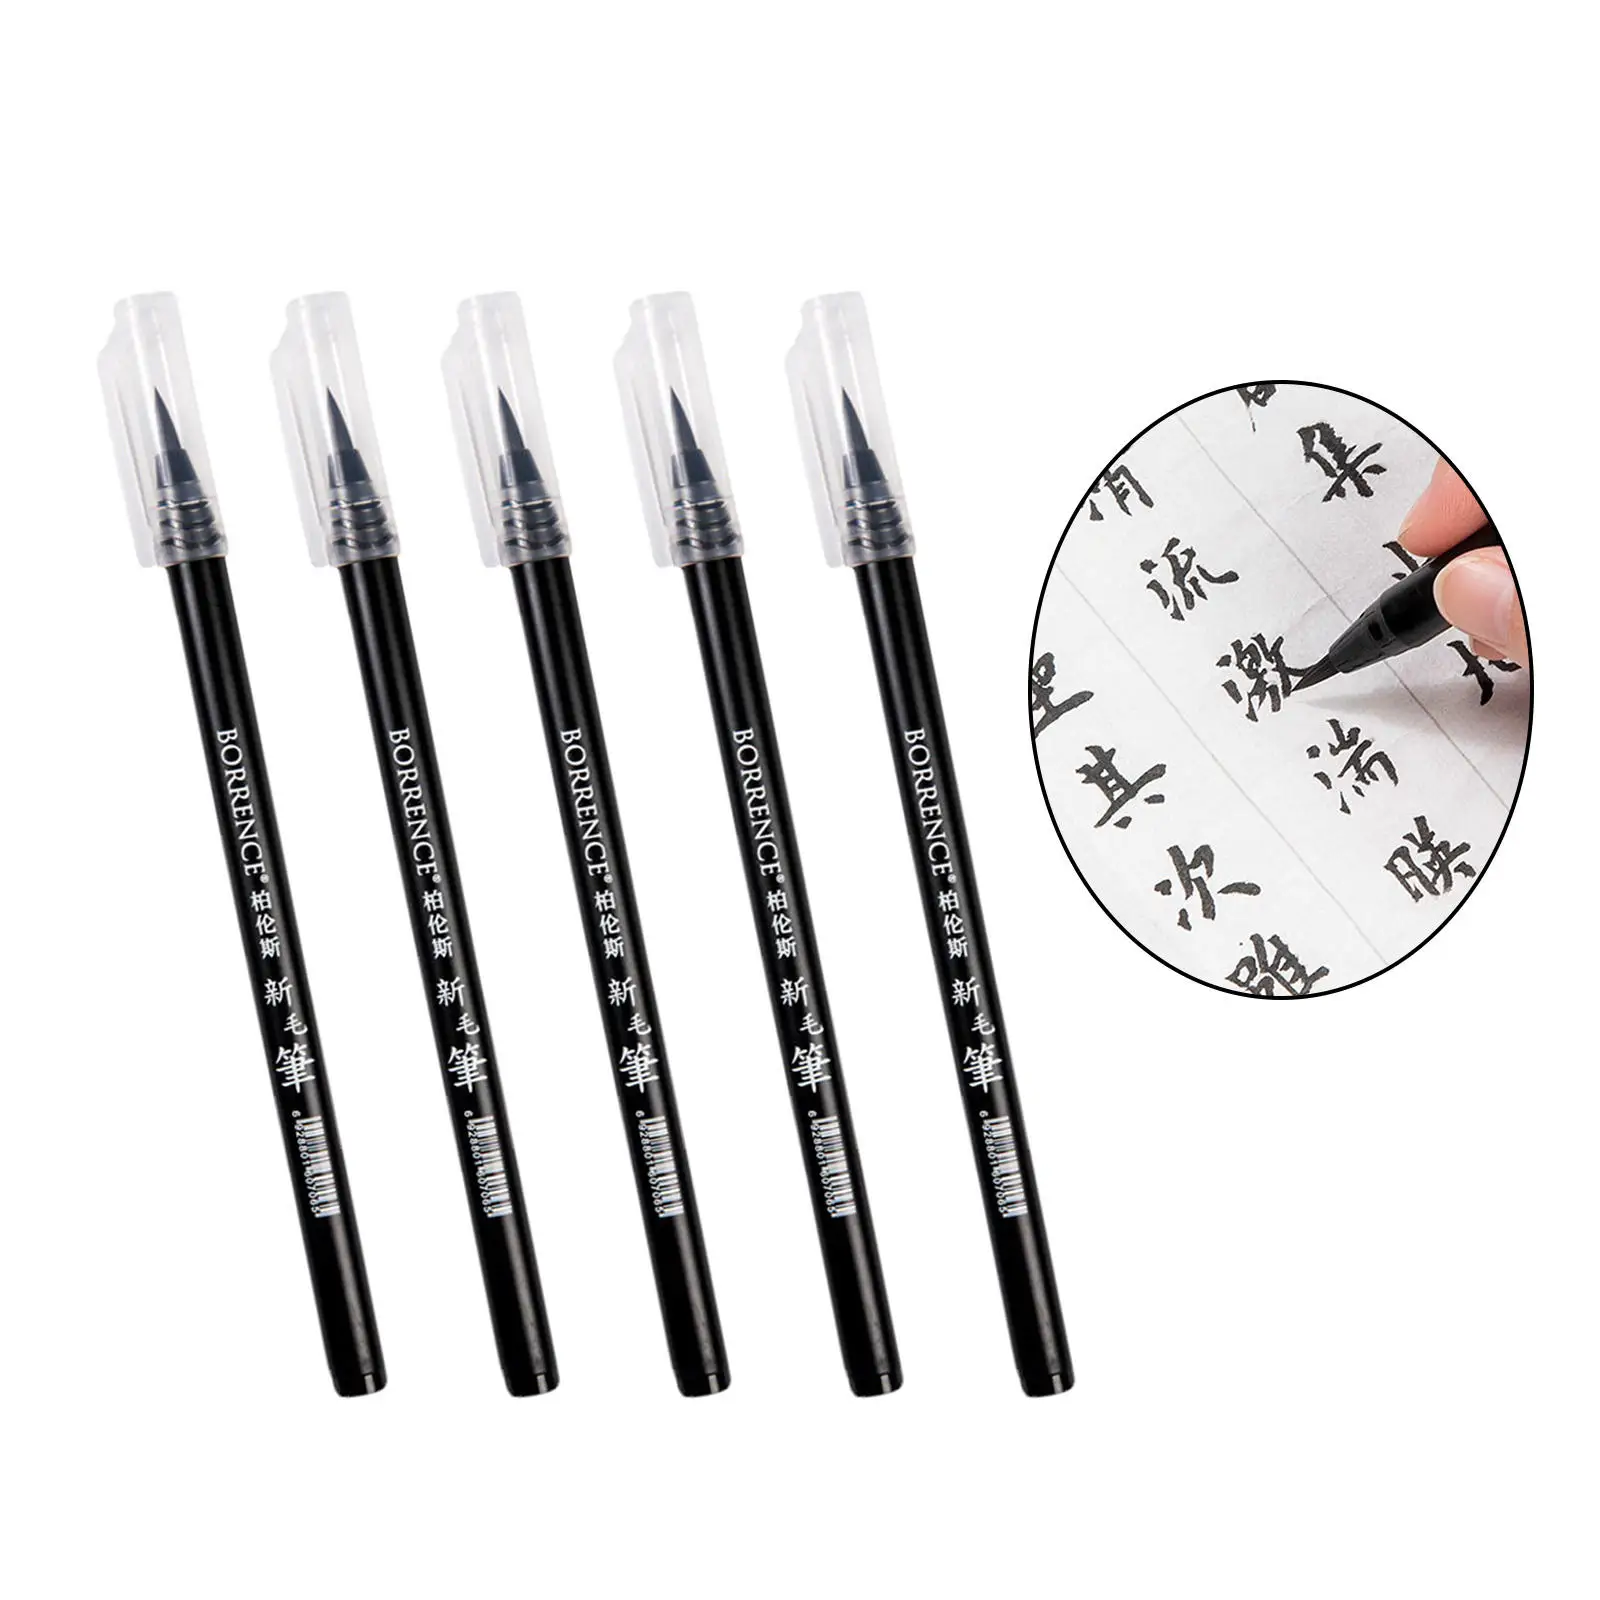 5Pcs Soft Brush Pen Black Waterproof Compact Plastic Shaft Synthetic Art Drawing Writing Lettering for Artist Painting Brush Set